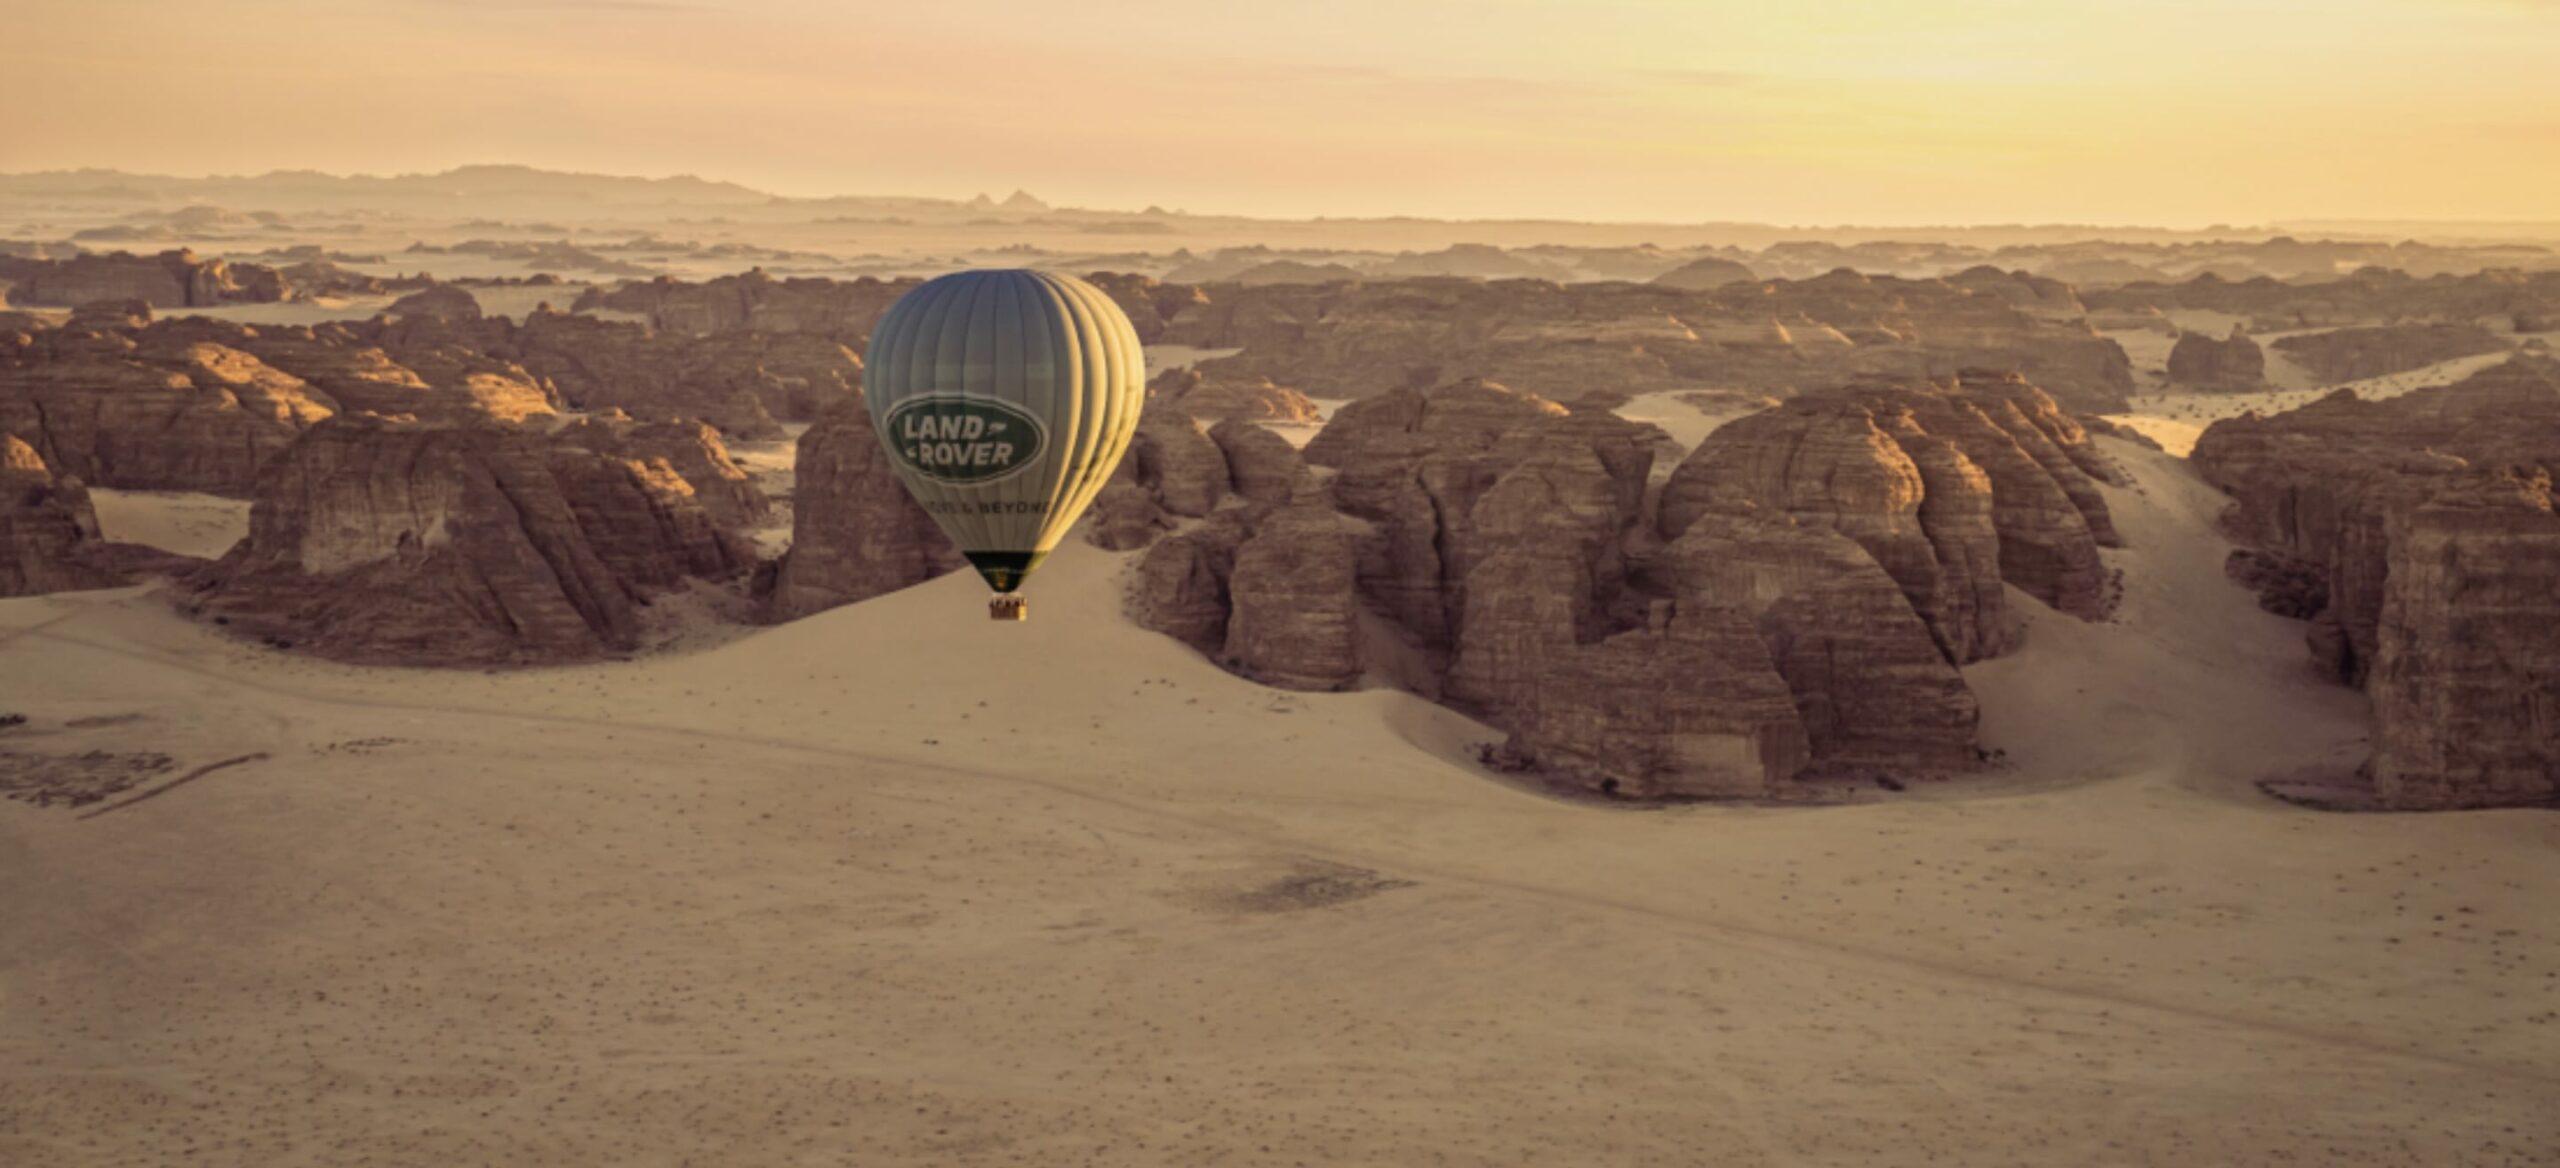 31 magnificent things to do in Saudi Arabia this May